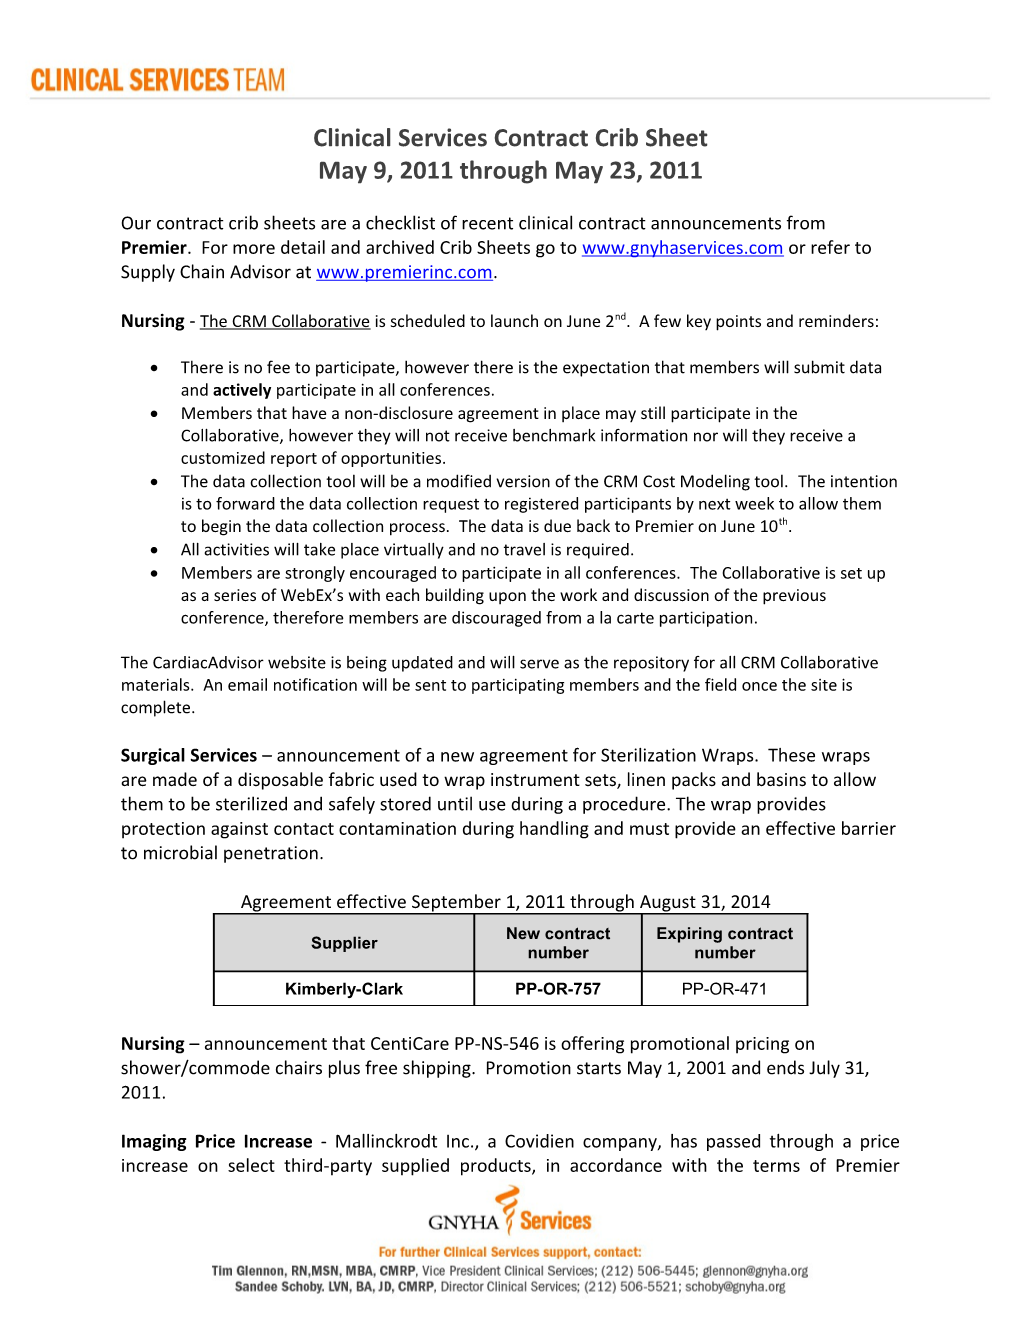 Clinical Services Contract Crib Sheet